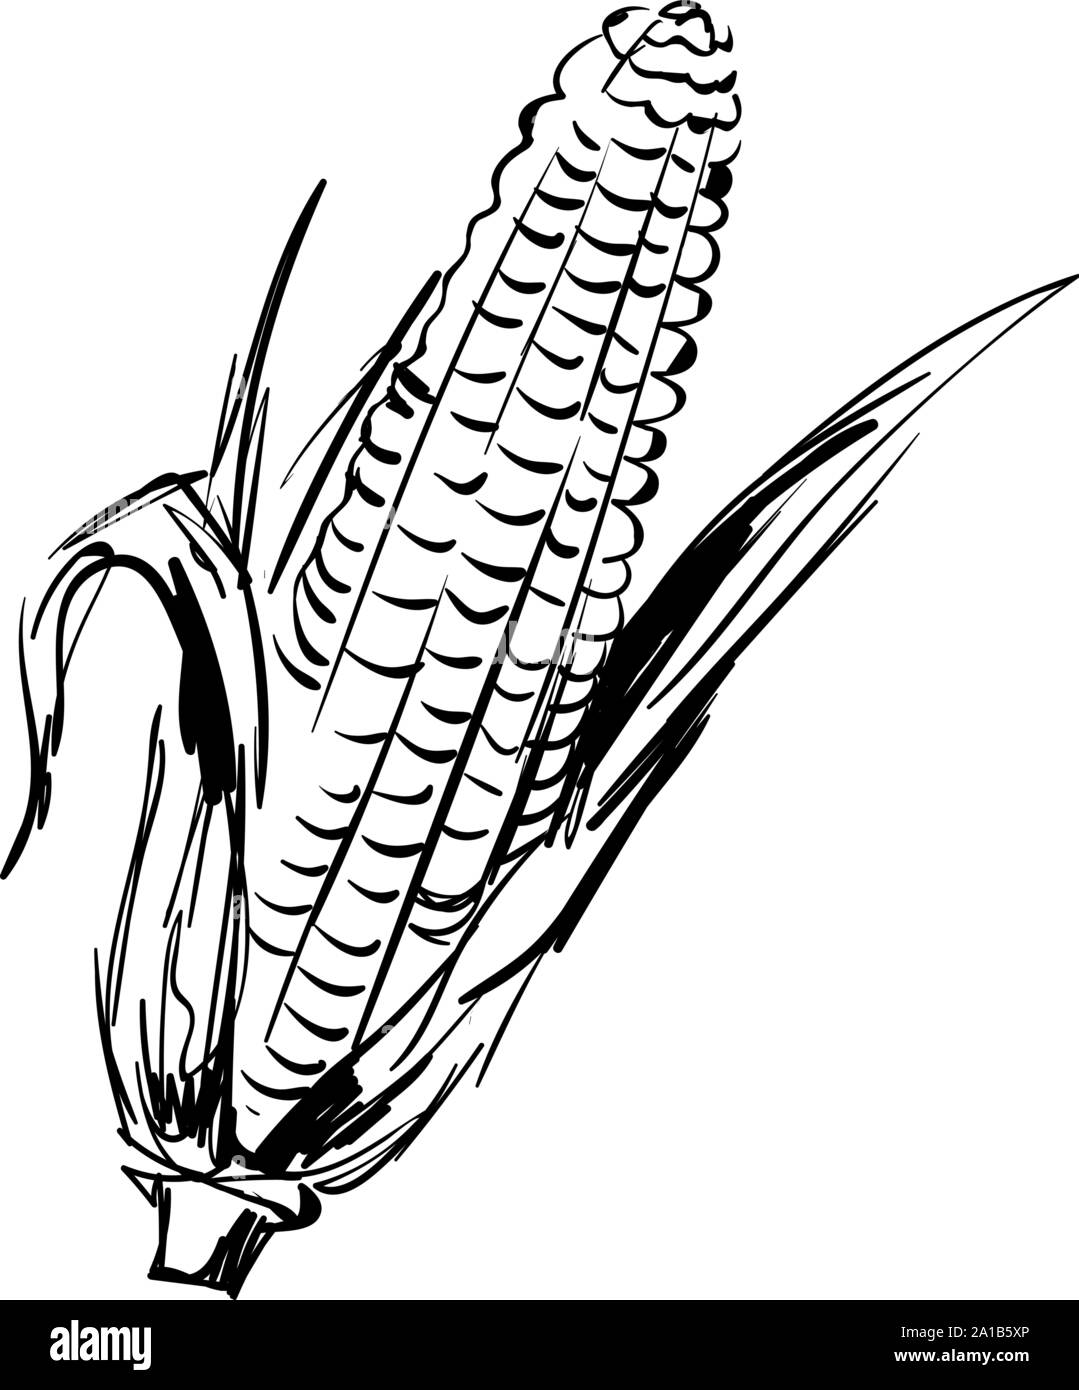 Corn drawing, illustration, vector on white background Stock Vector ...